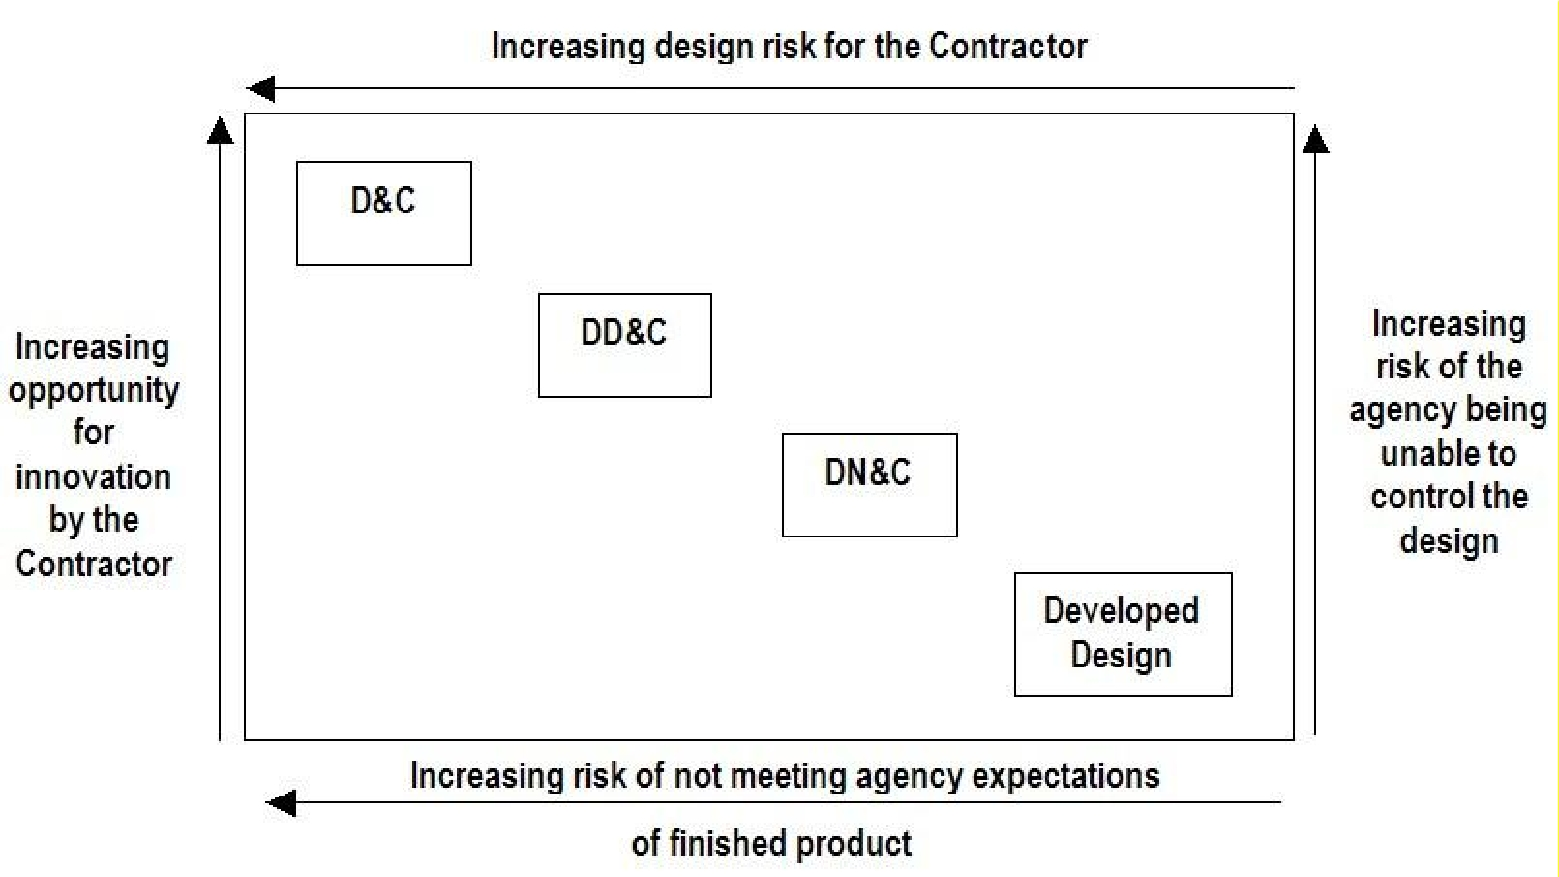 Risk allocation in construction contracts is higher for D&C, followed by DD&C, DN&C and Developed Design.